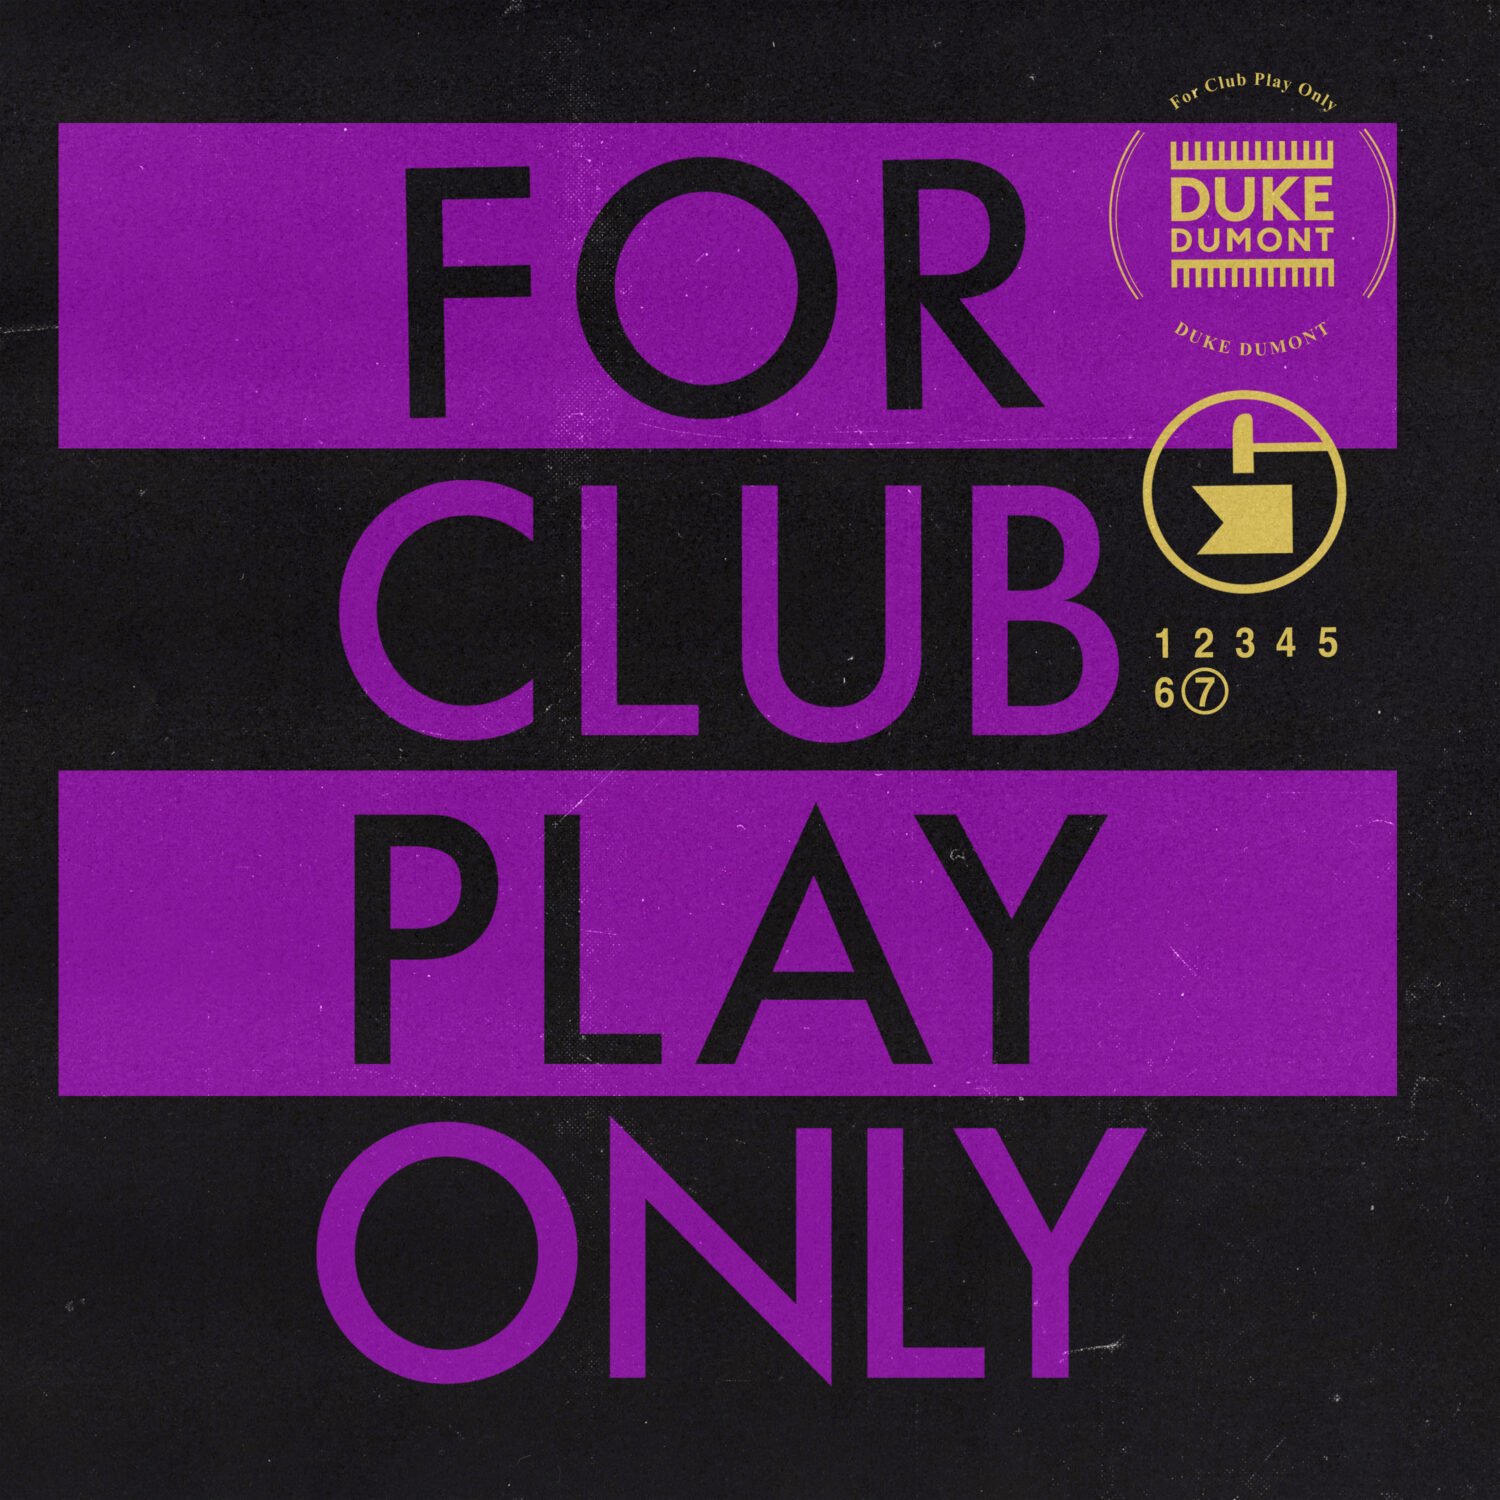 Duke Dumont Releases Tour Dates and HipHop Based EP, For Club Play Only